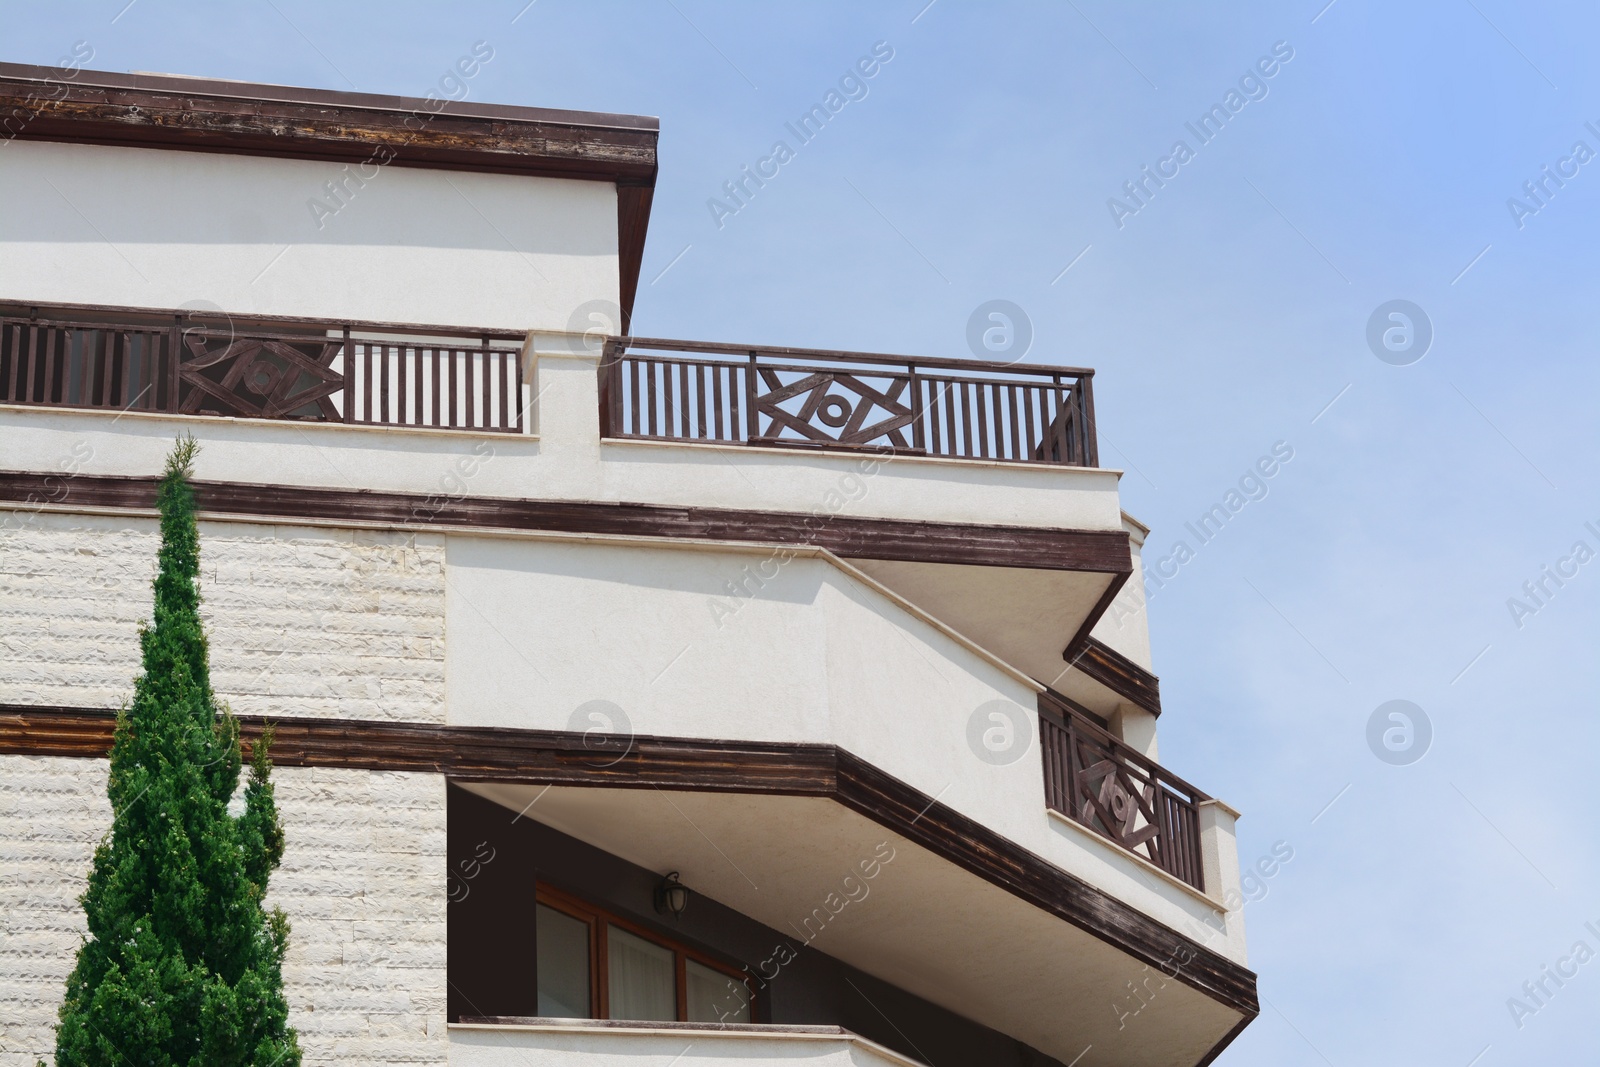 Photo of Exterior of residential building with balconies against blue sky, low angle view